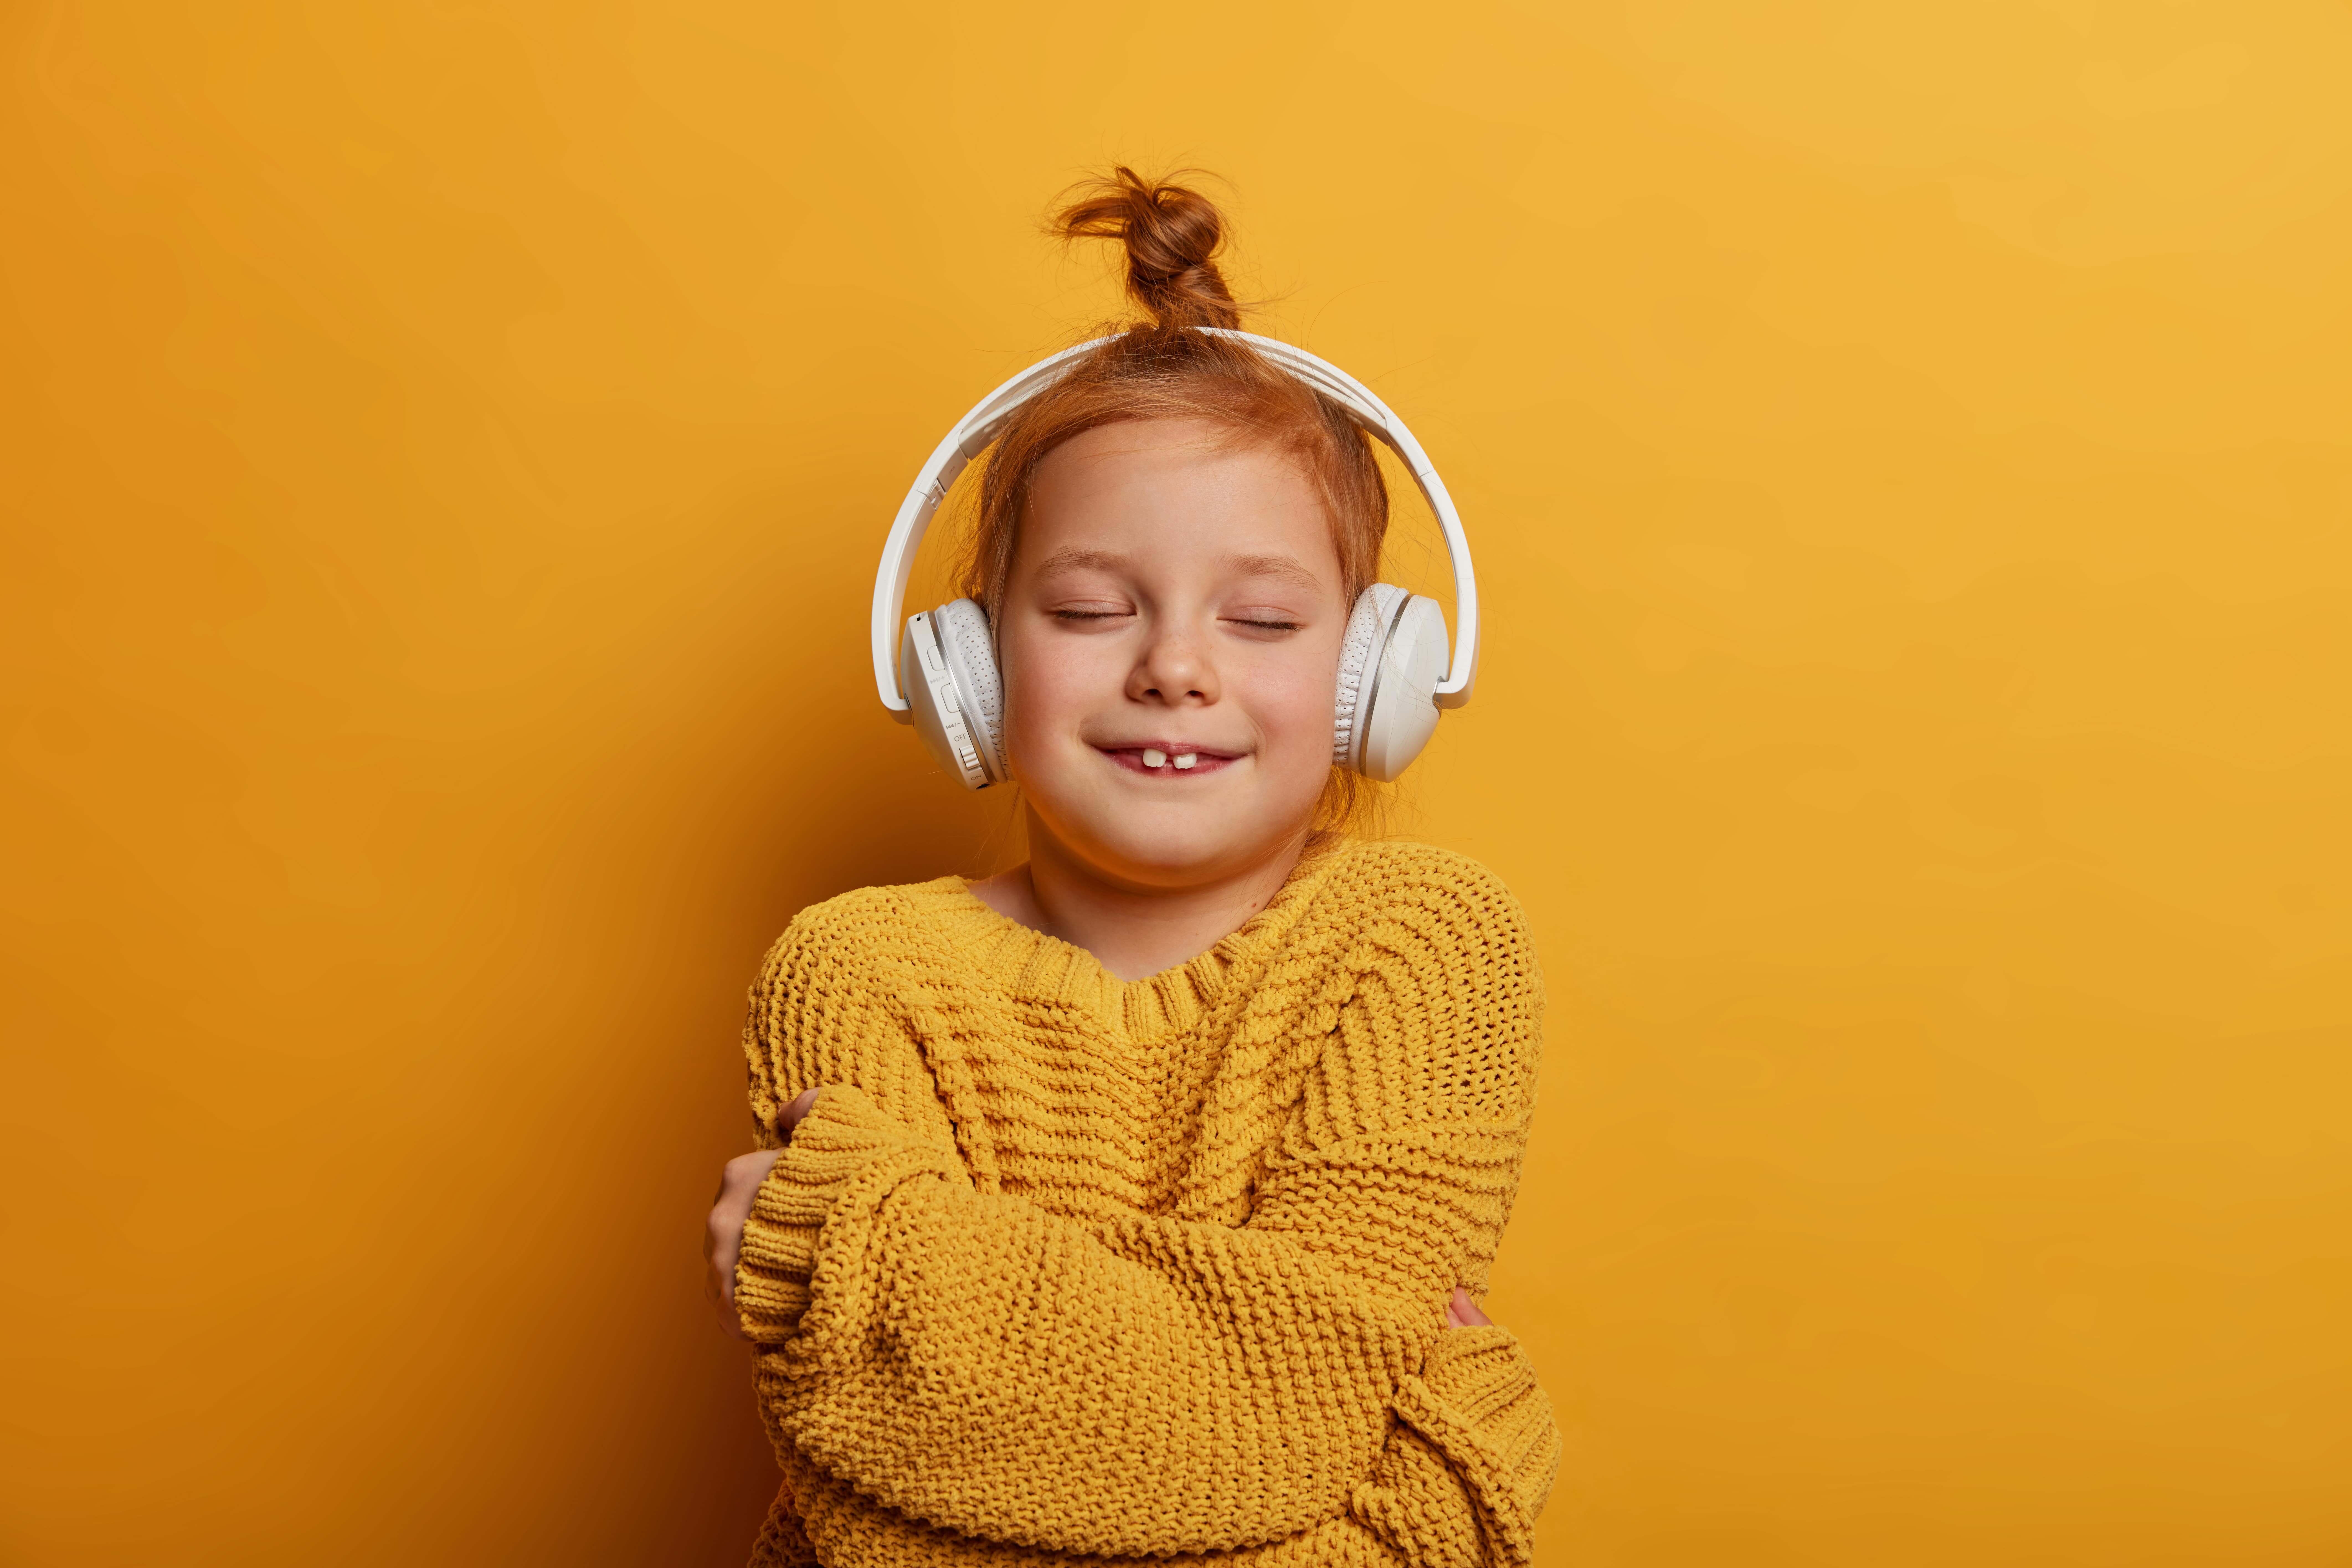 Using Sound as Therapy